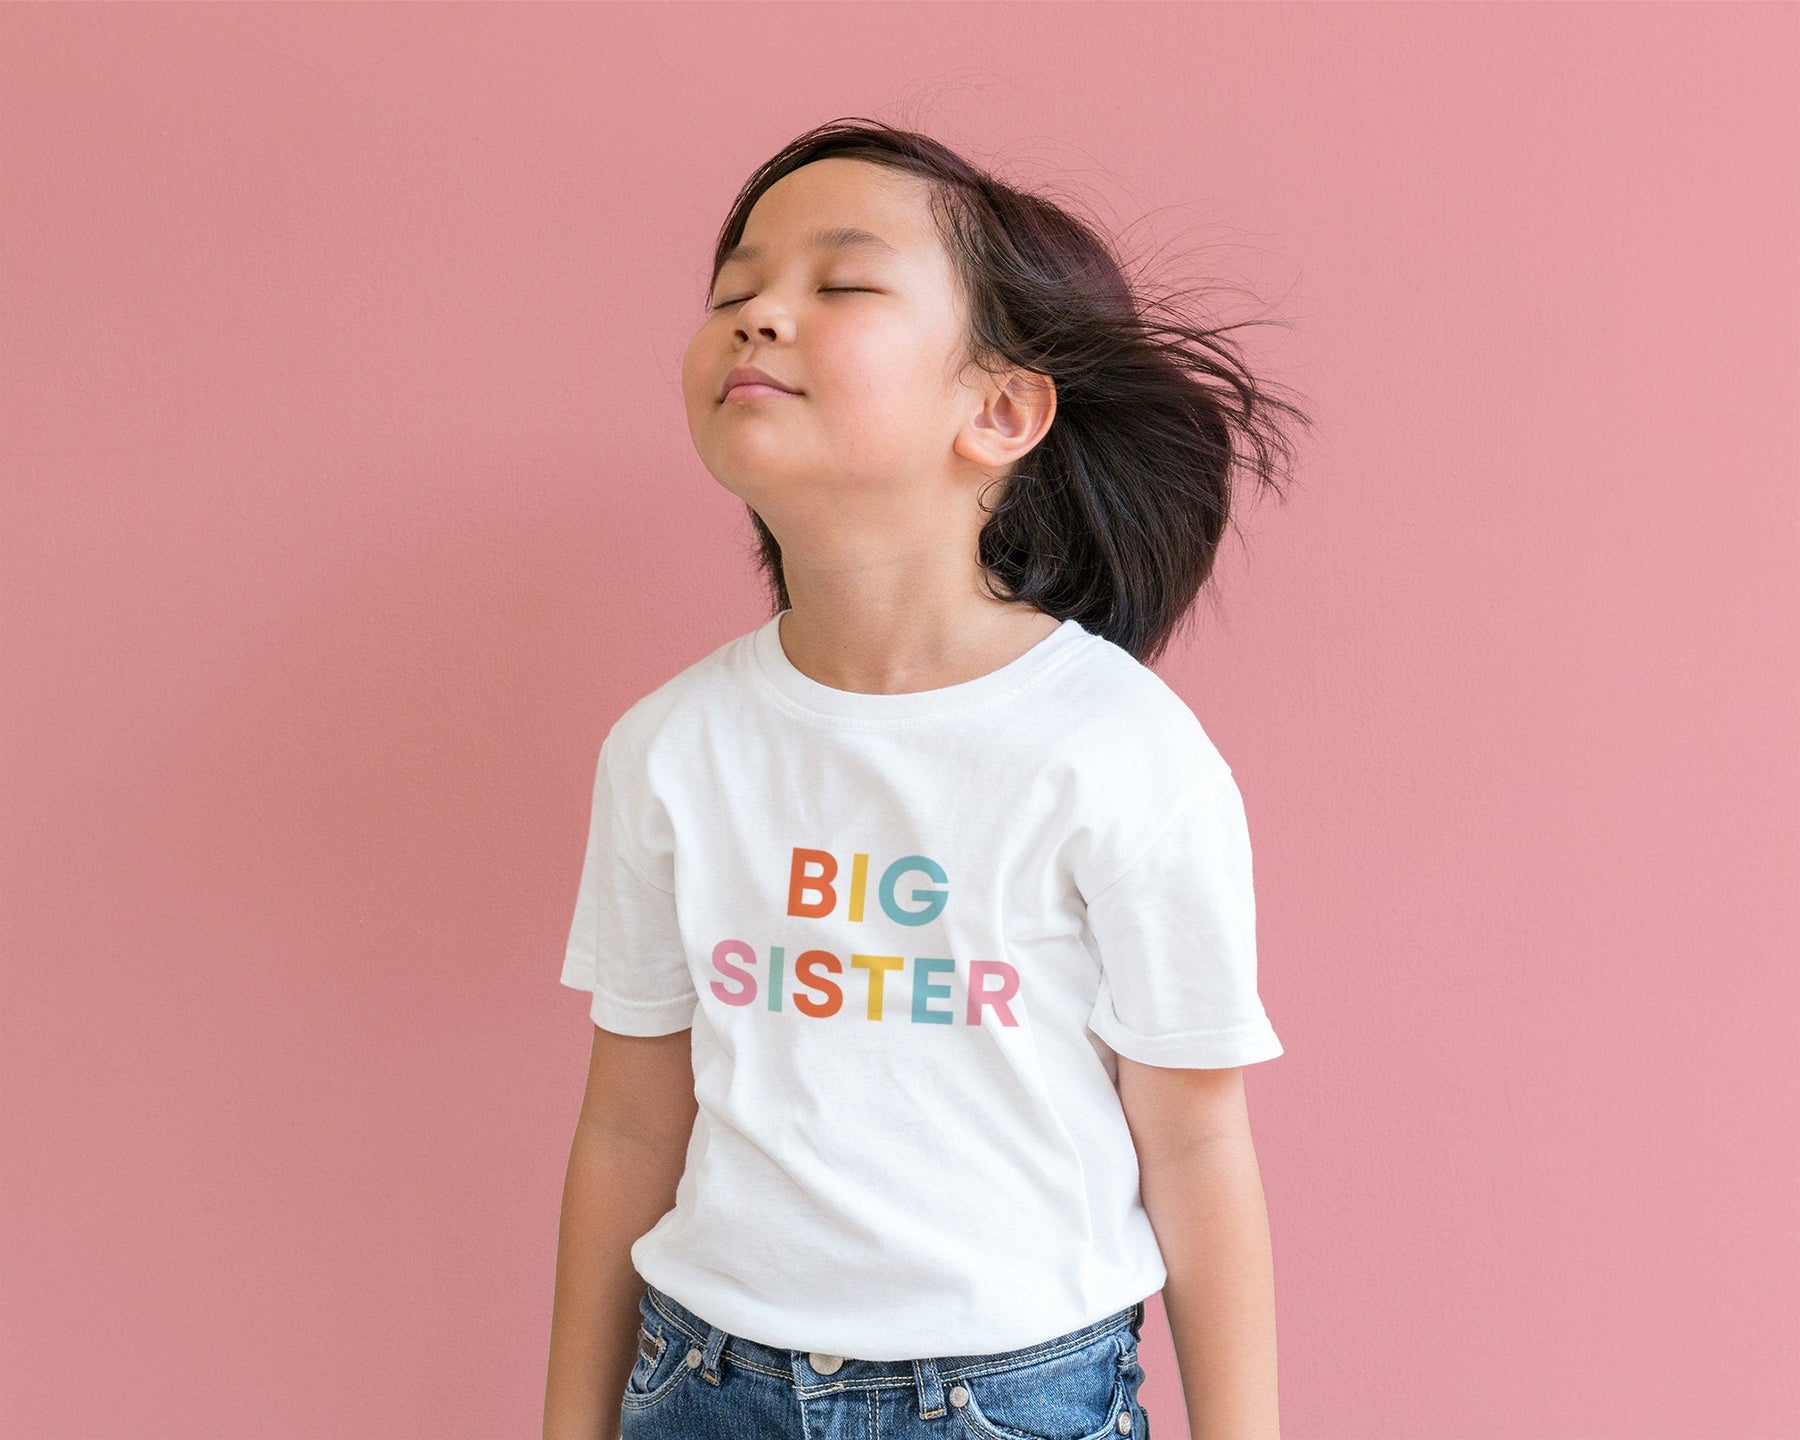 / Big – Little Shirt Sister and Milk Sister Cookies